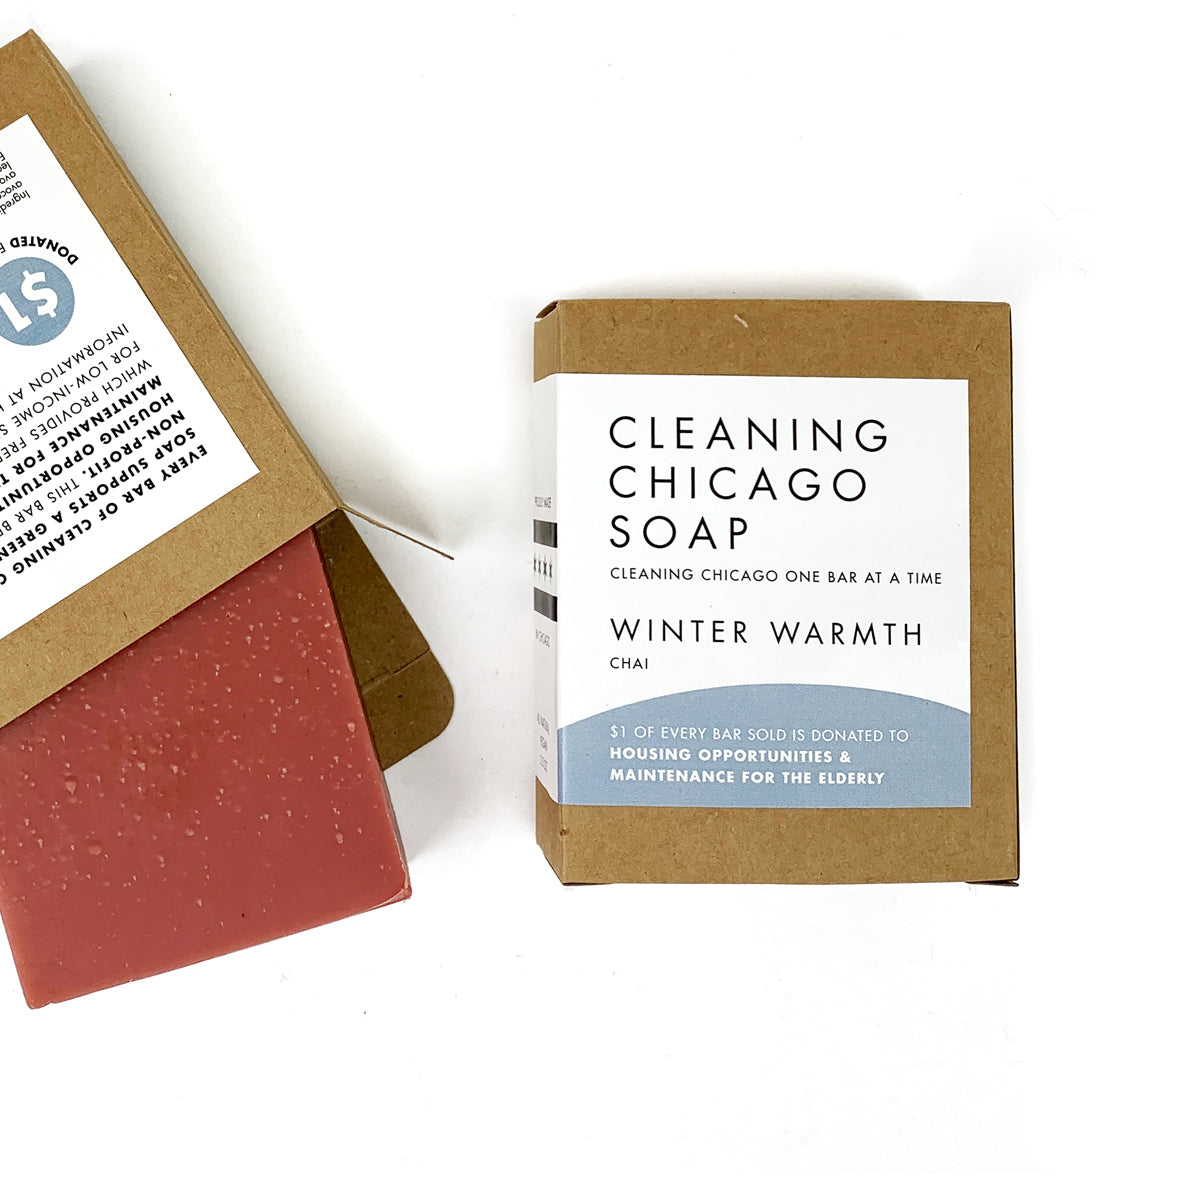 Cleaning Chicago Winter Warmth Chai Soap